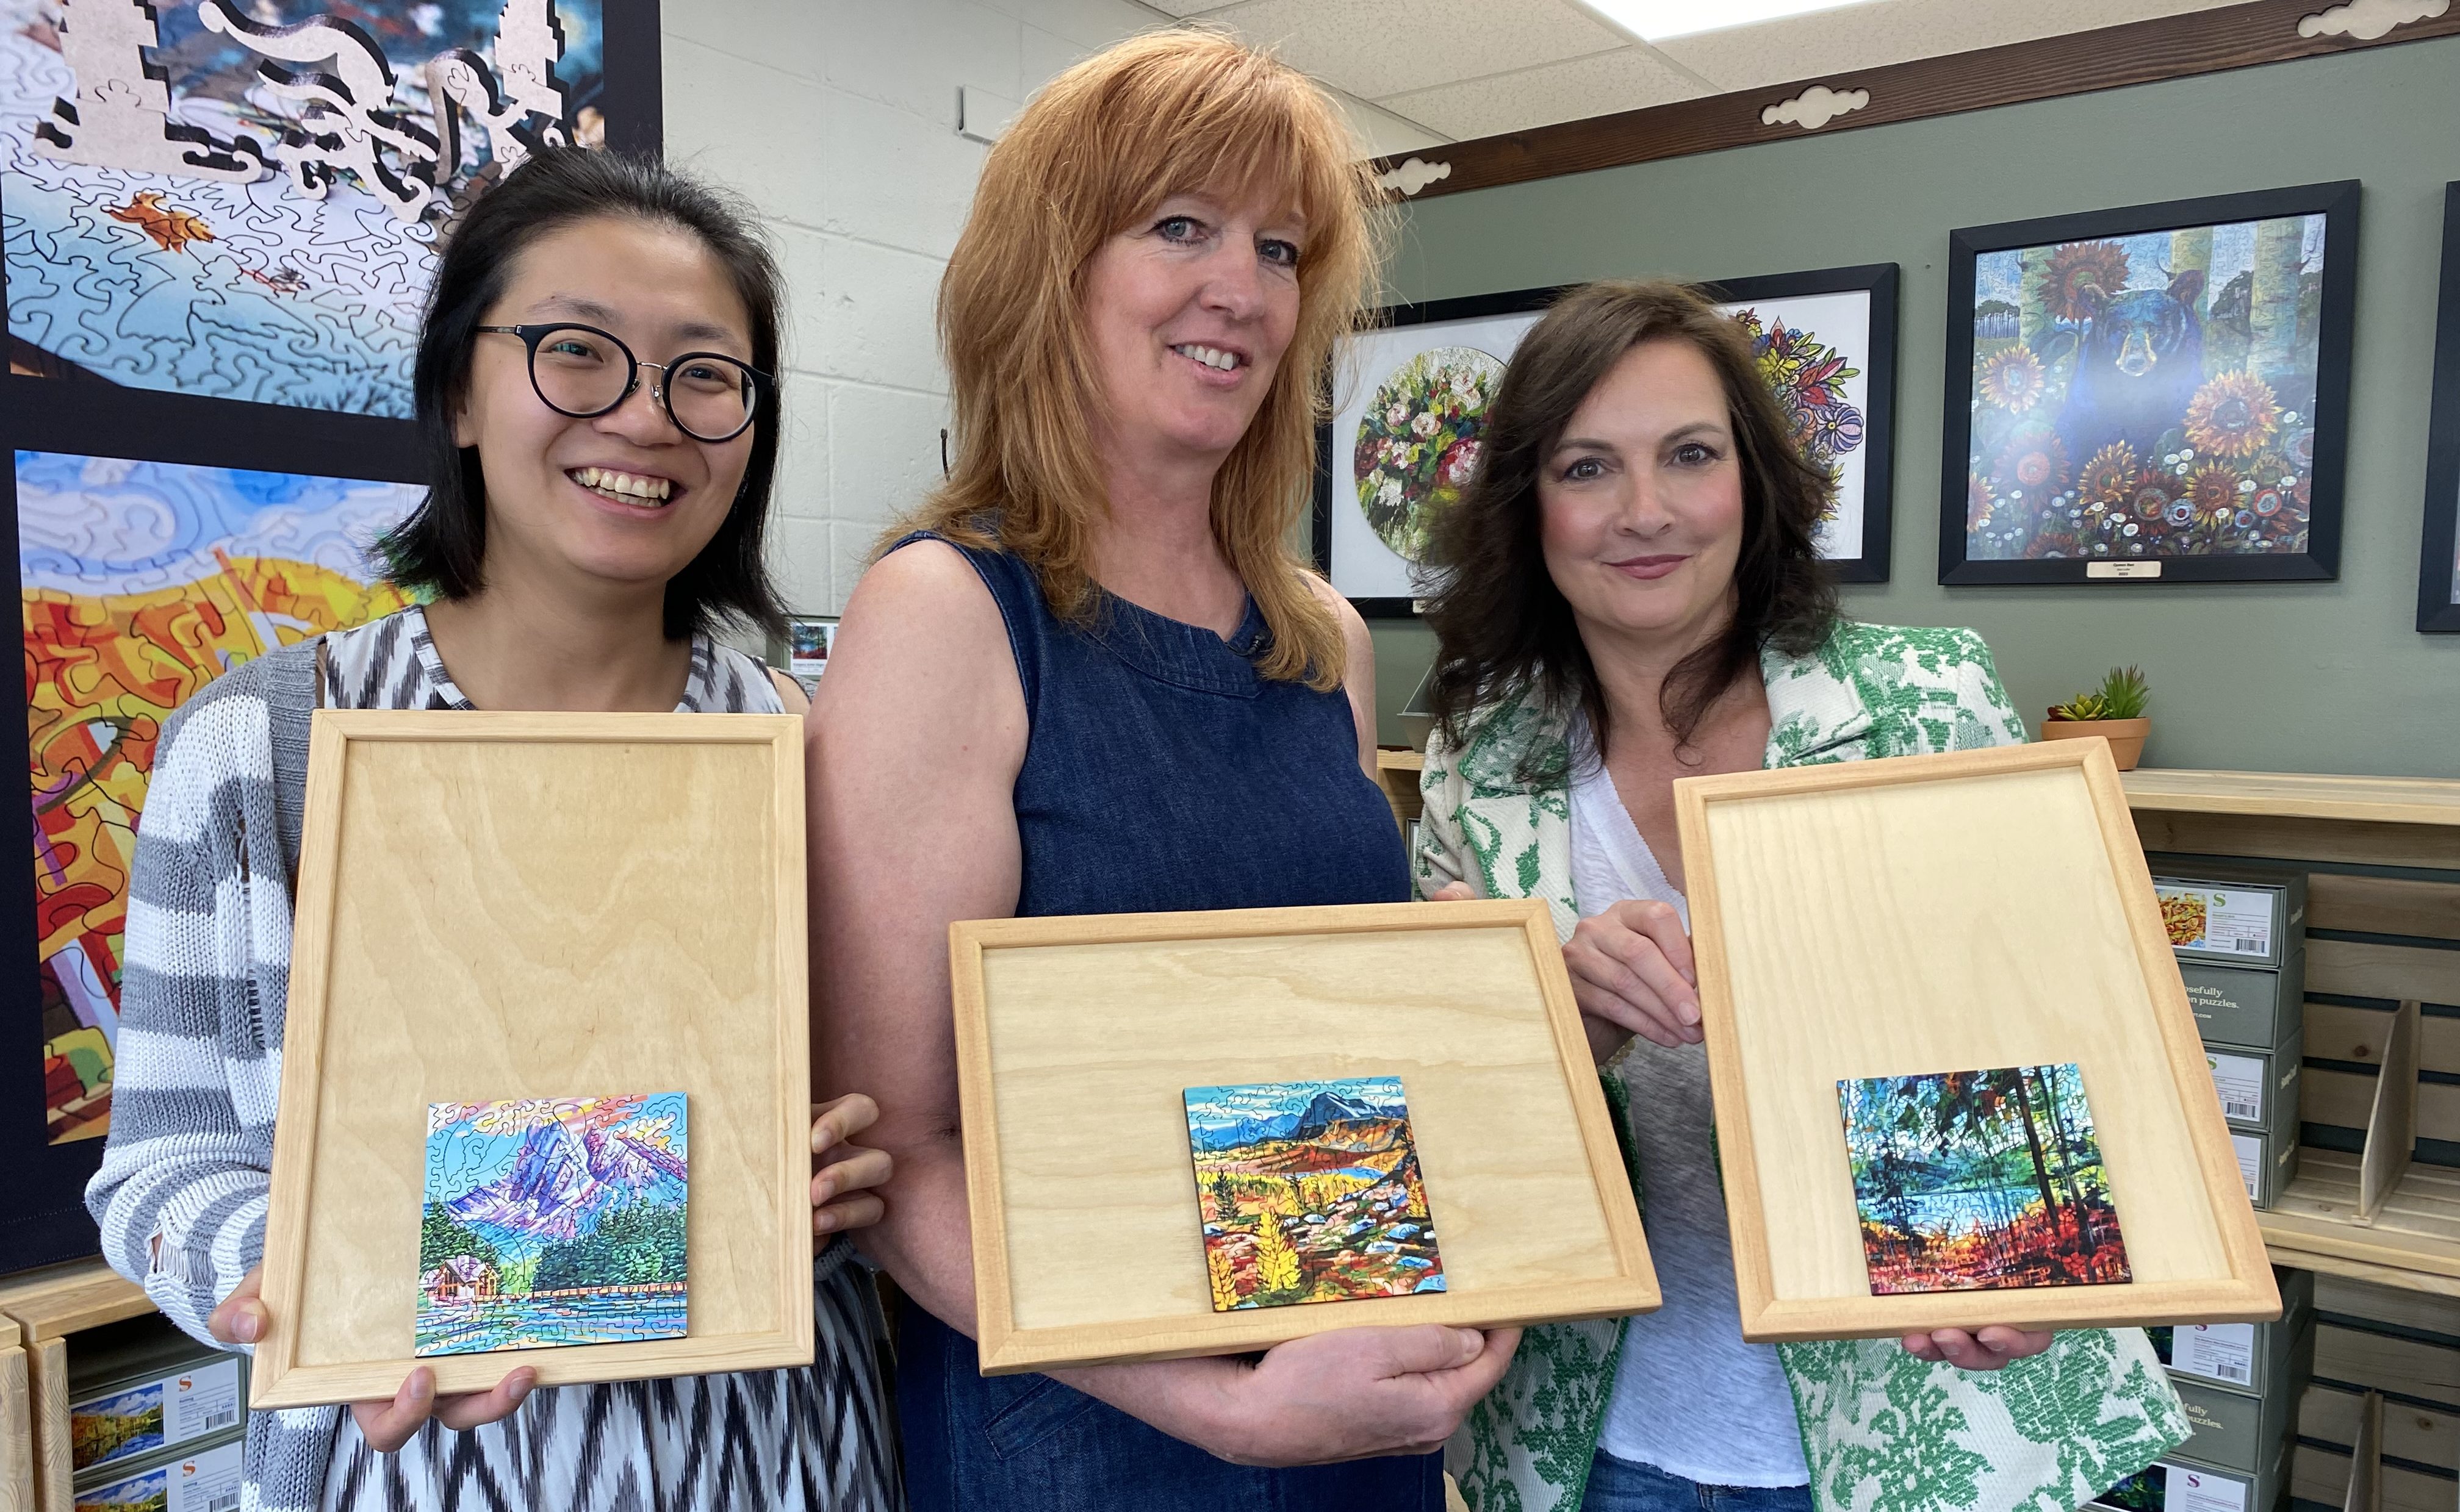 Three Calgary artists have works made into puzzles